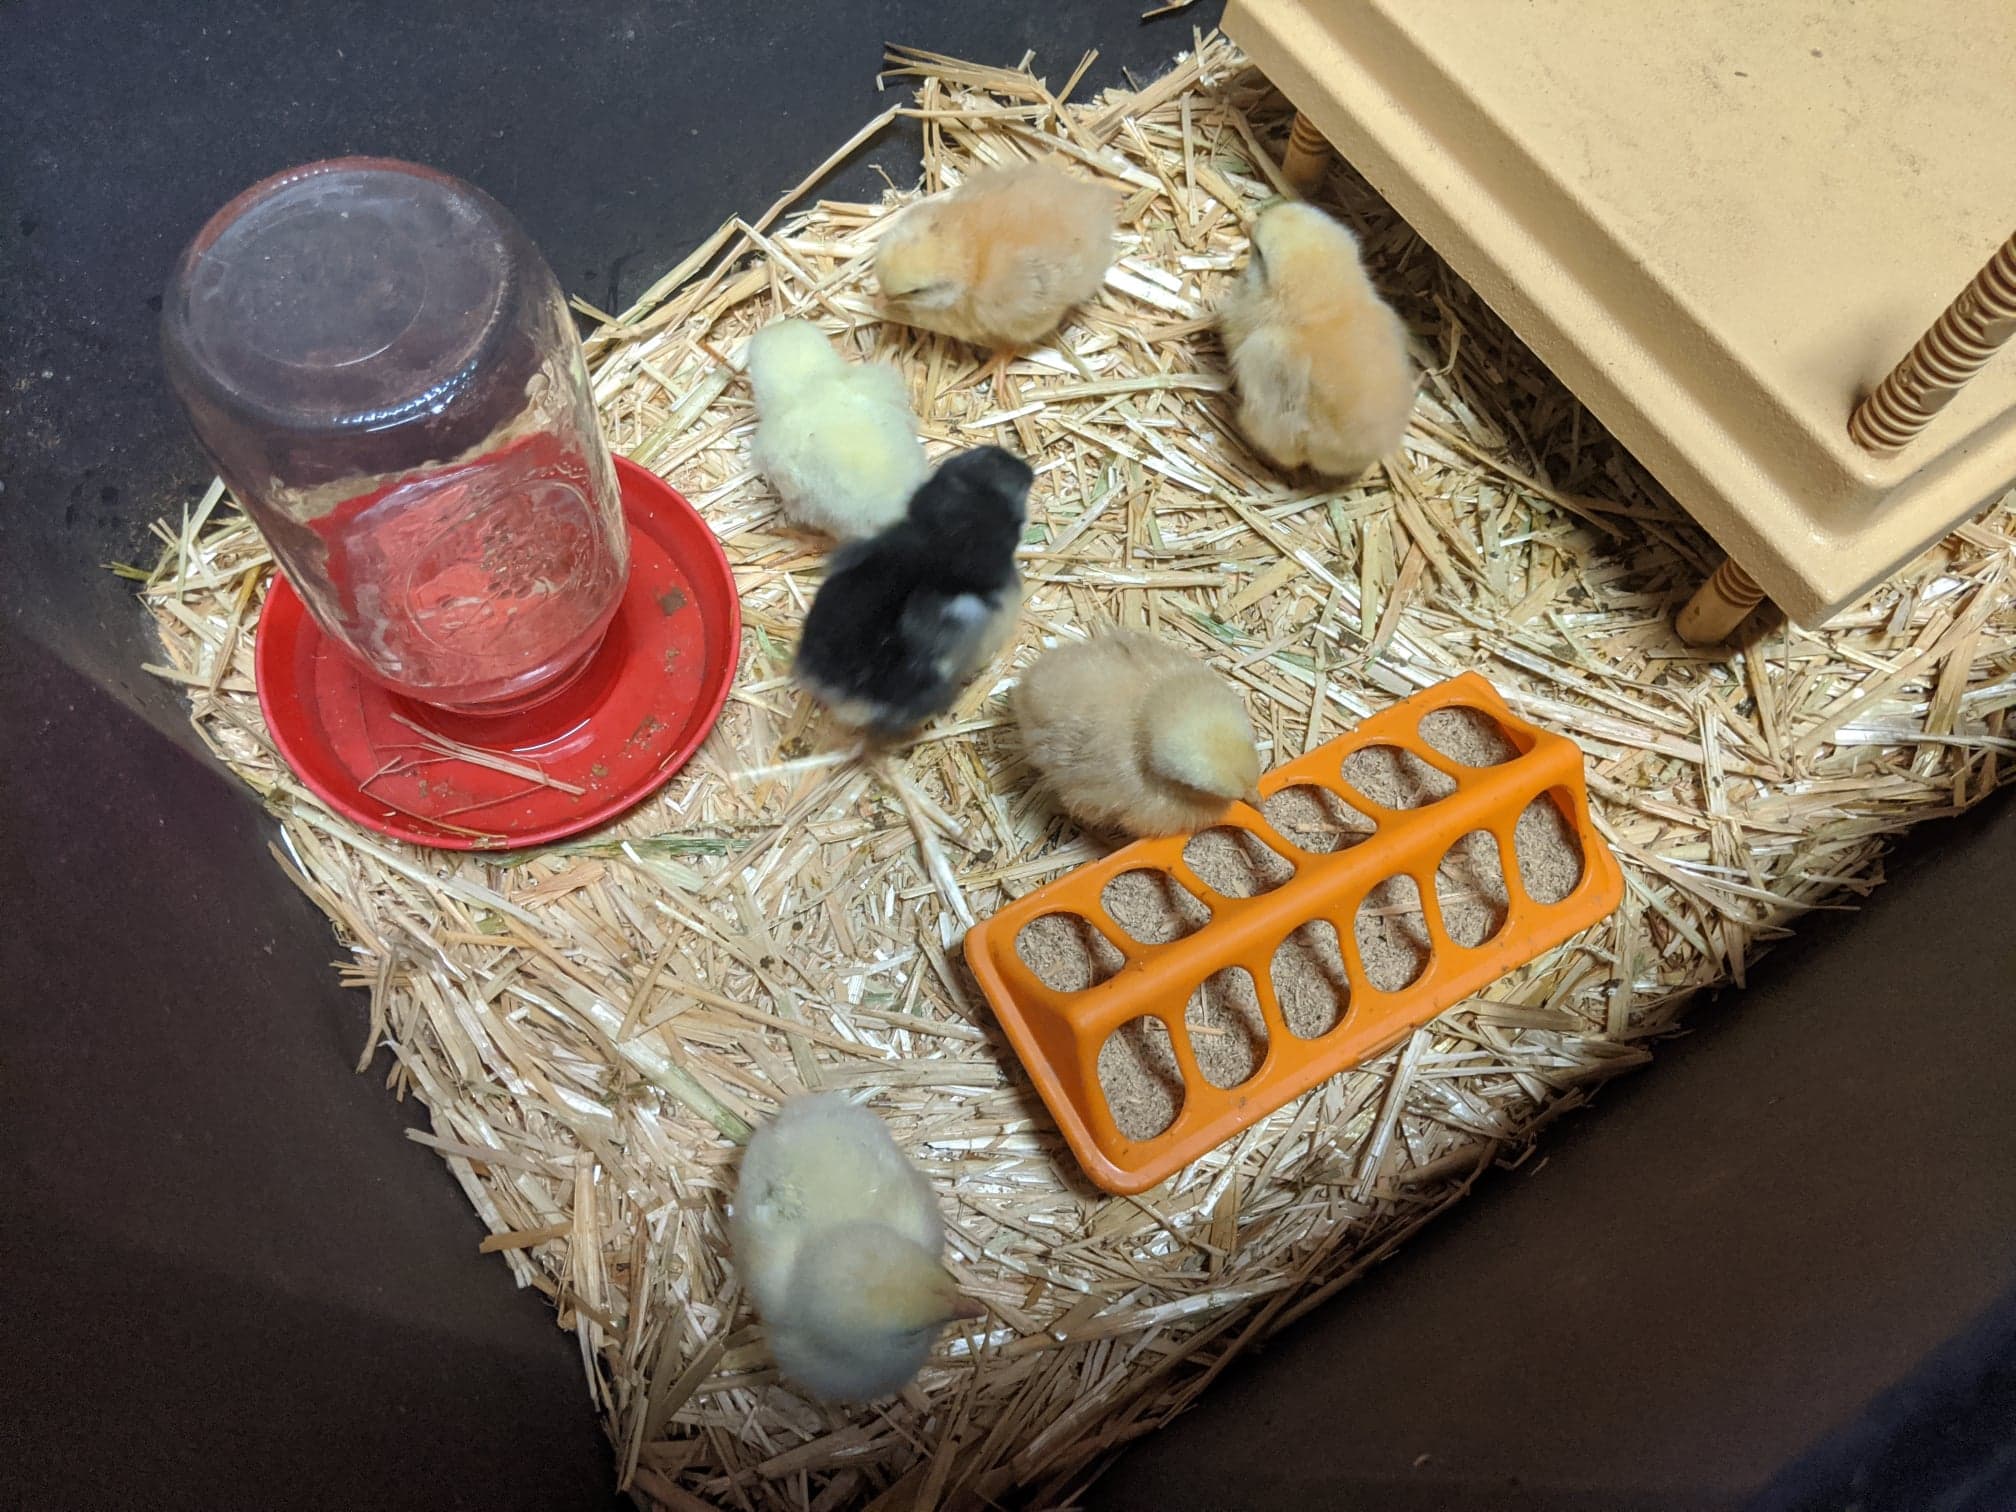 Unboxing the Baby Chicks!